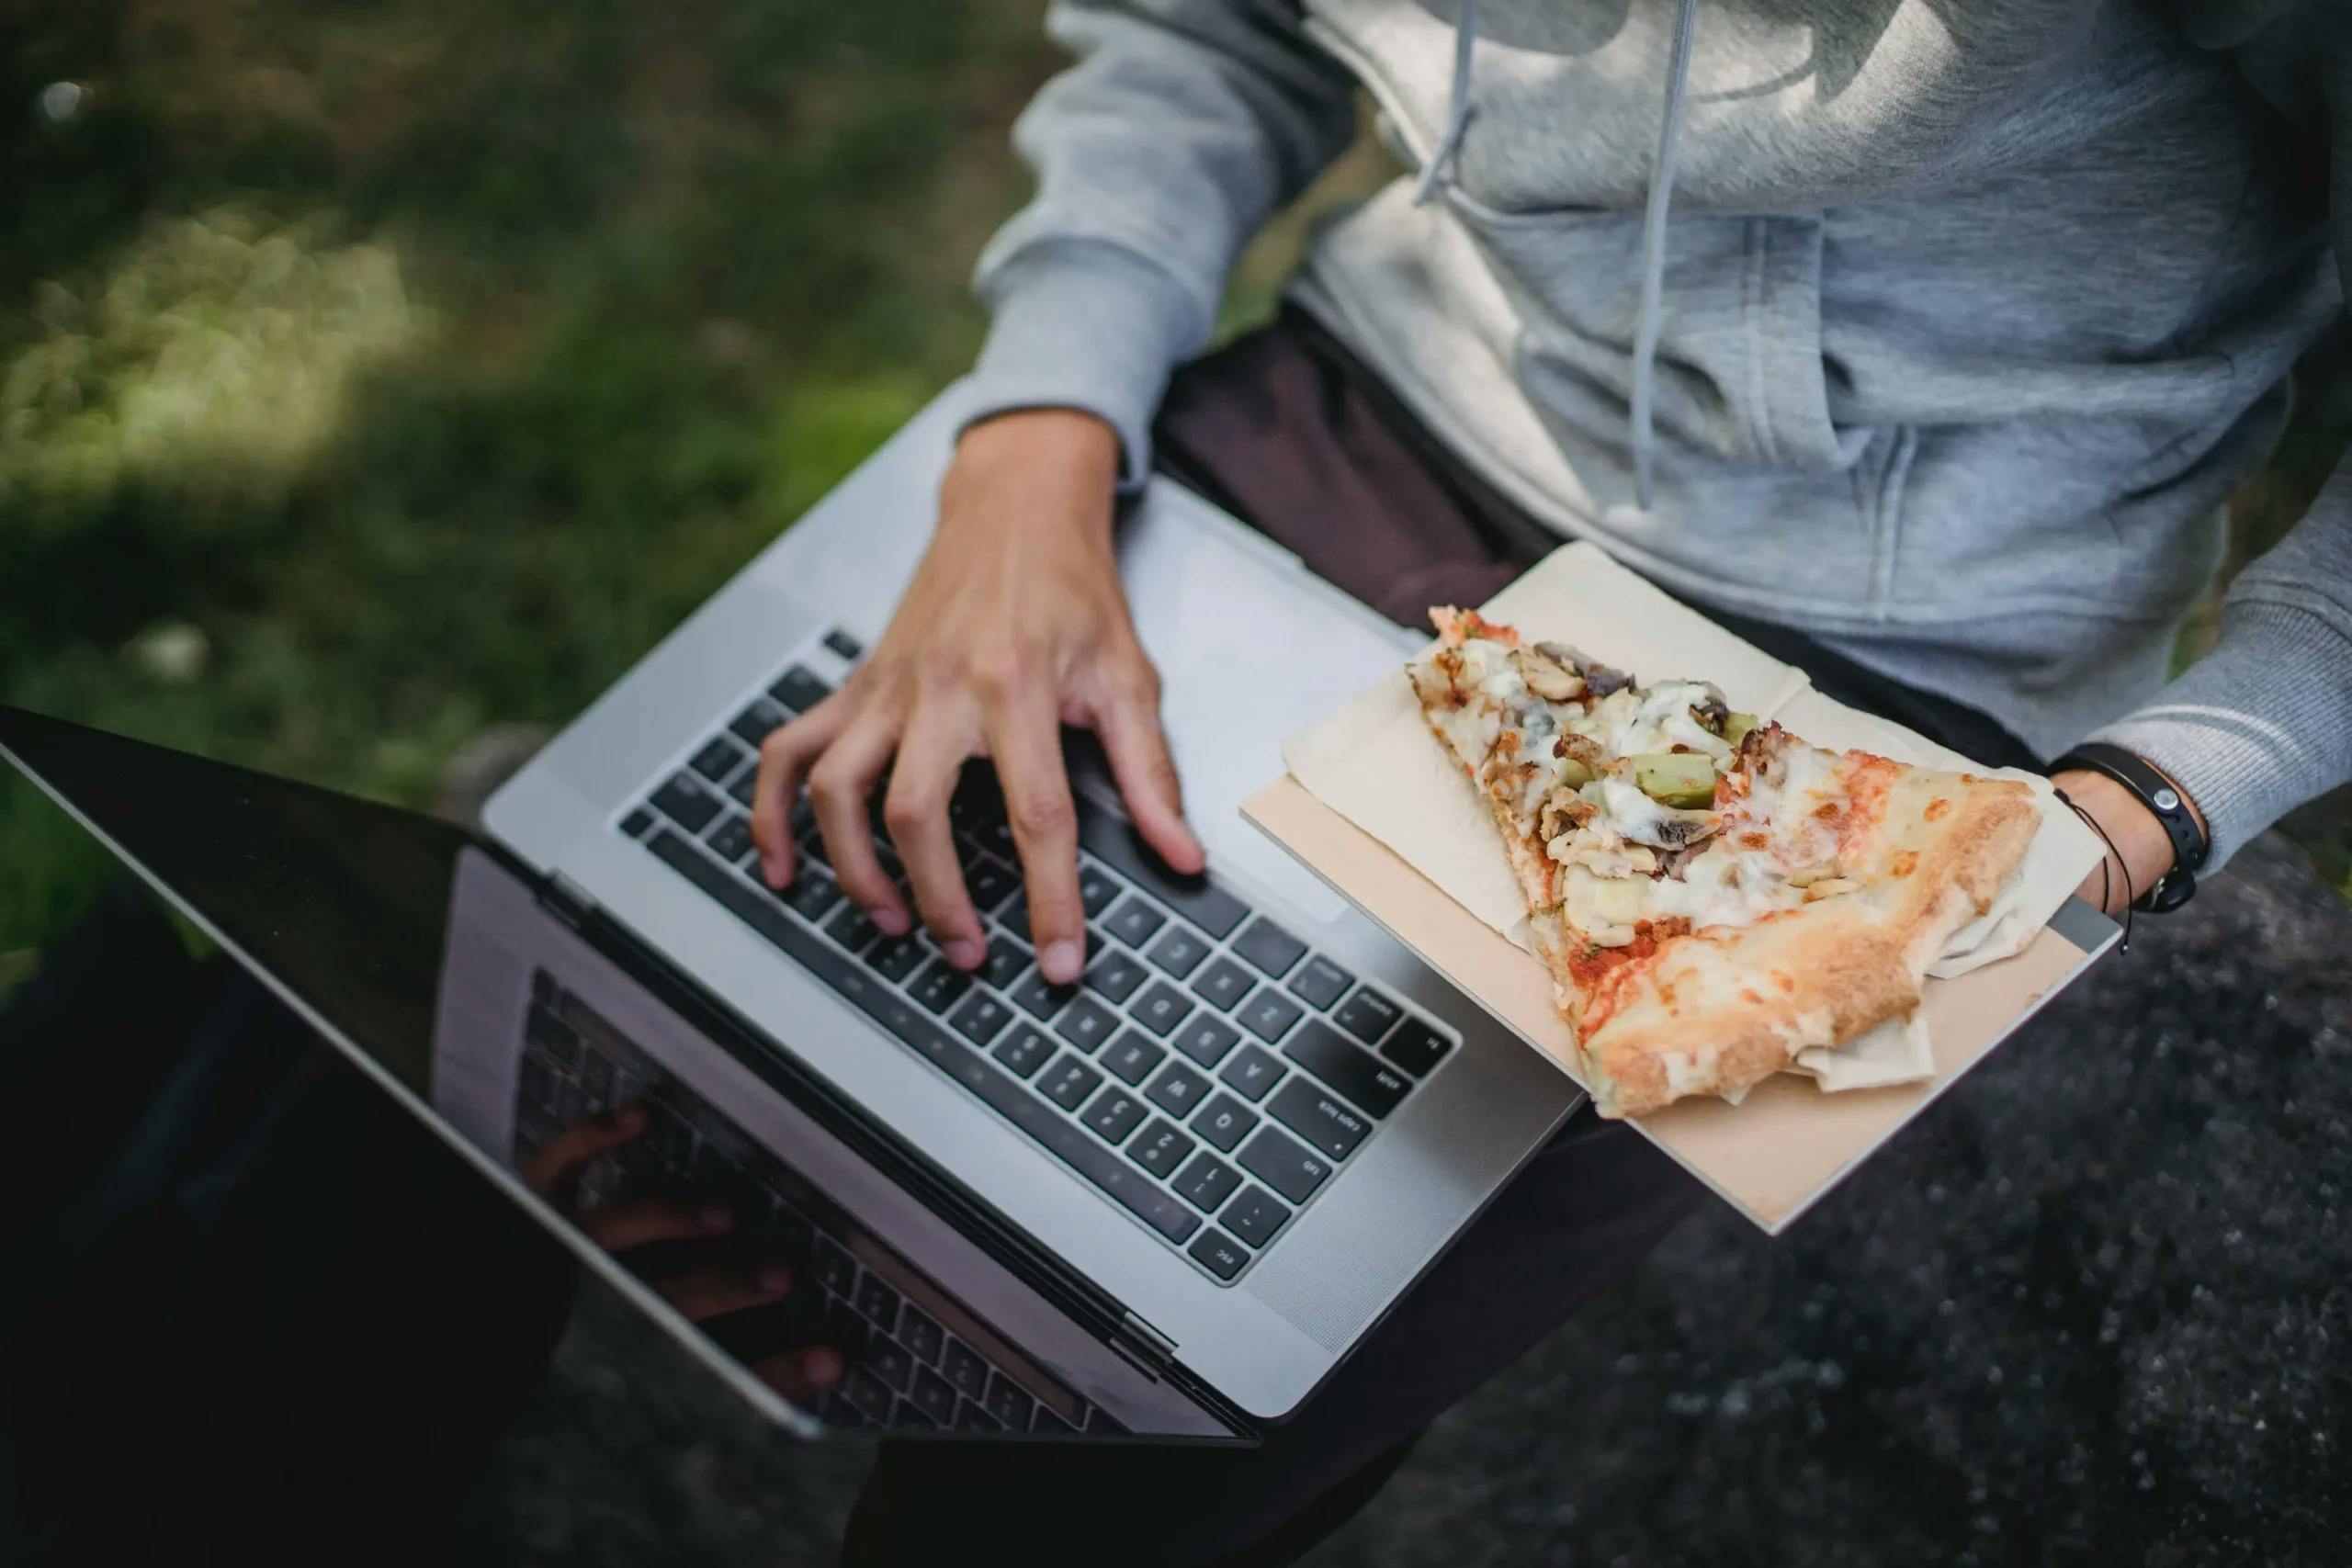 A young person working on a laptop while eating a slice of pizza.